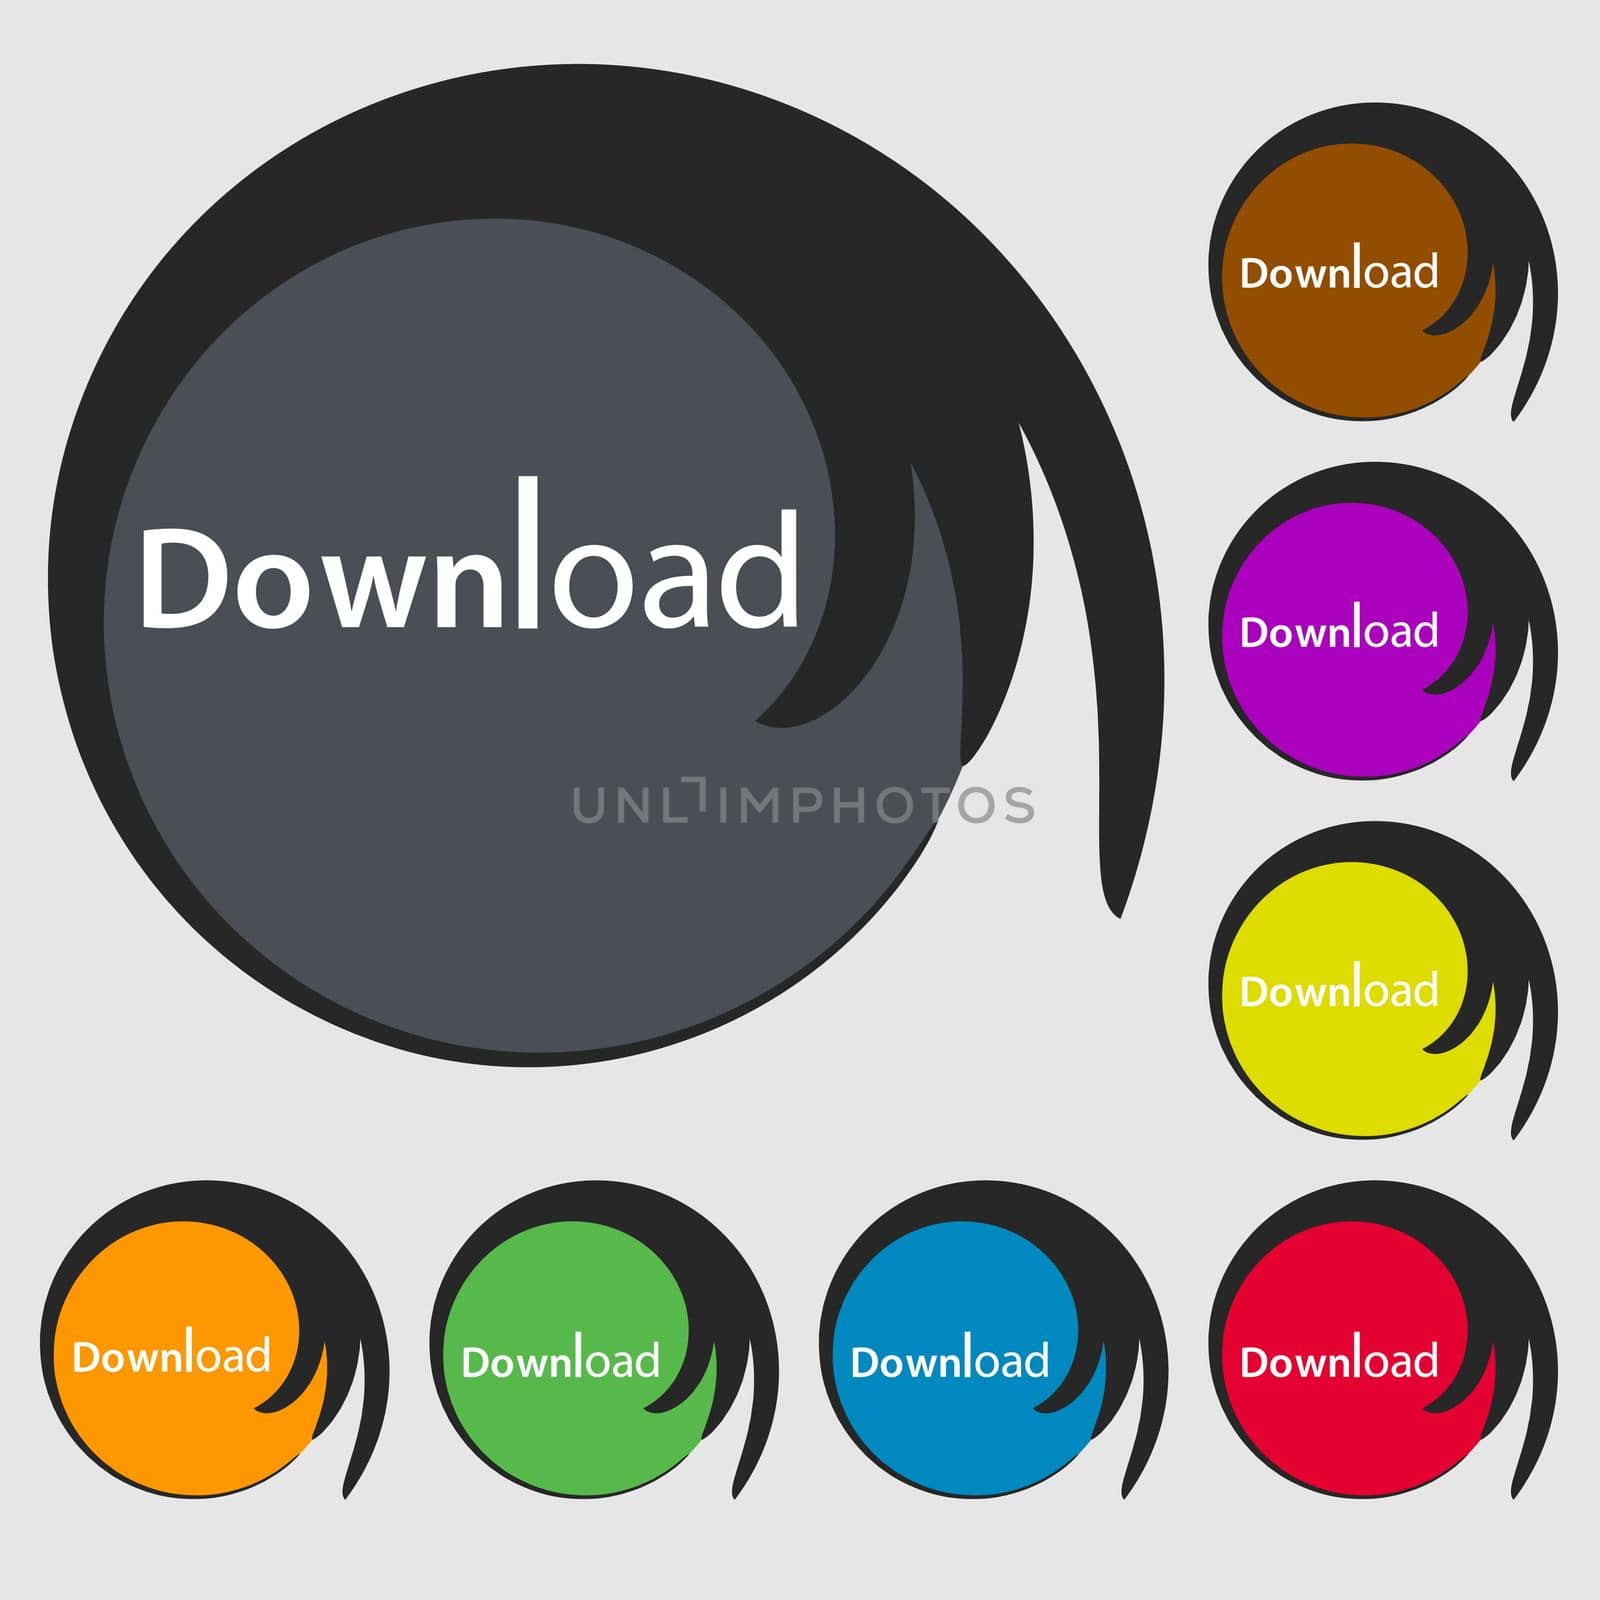 Download now icon. Load symbol. Symbols on eight colored buttons. illustration